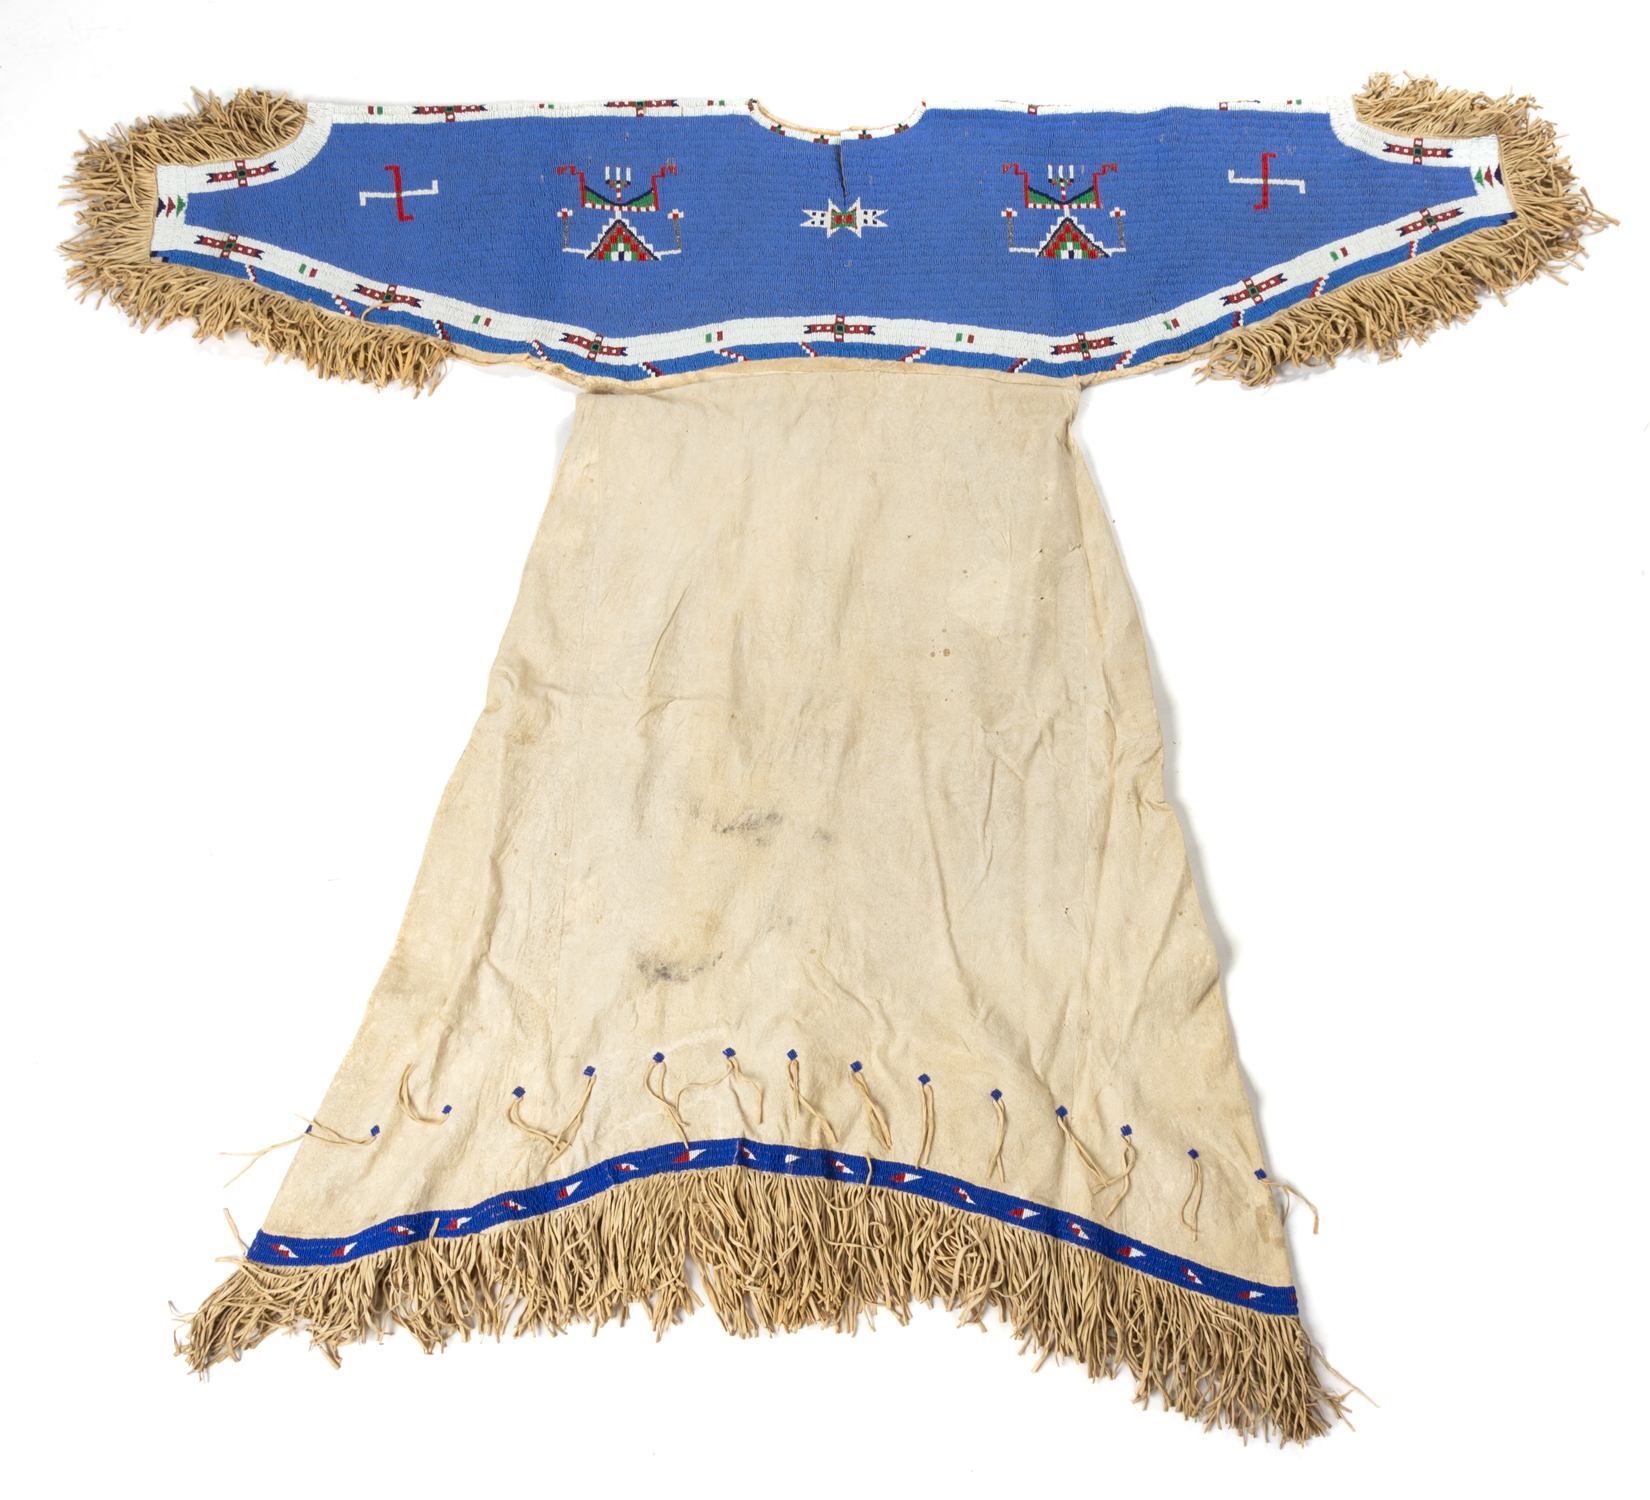 CHEYENNE WOMANS DRESS WITH WHIRLING